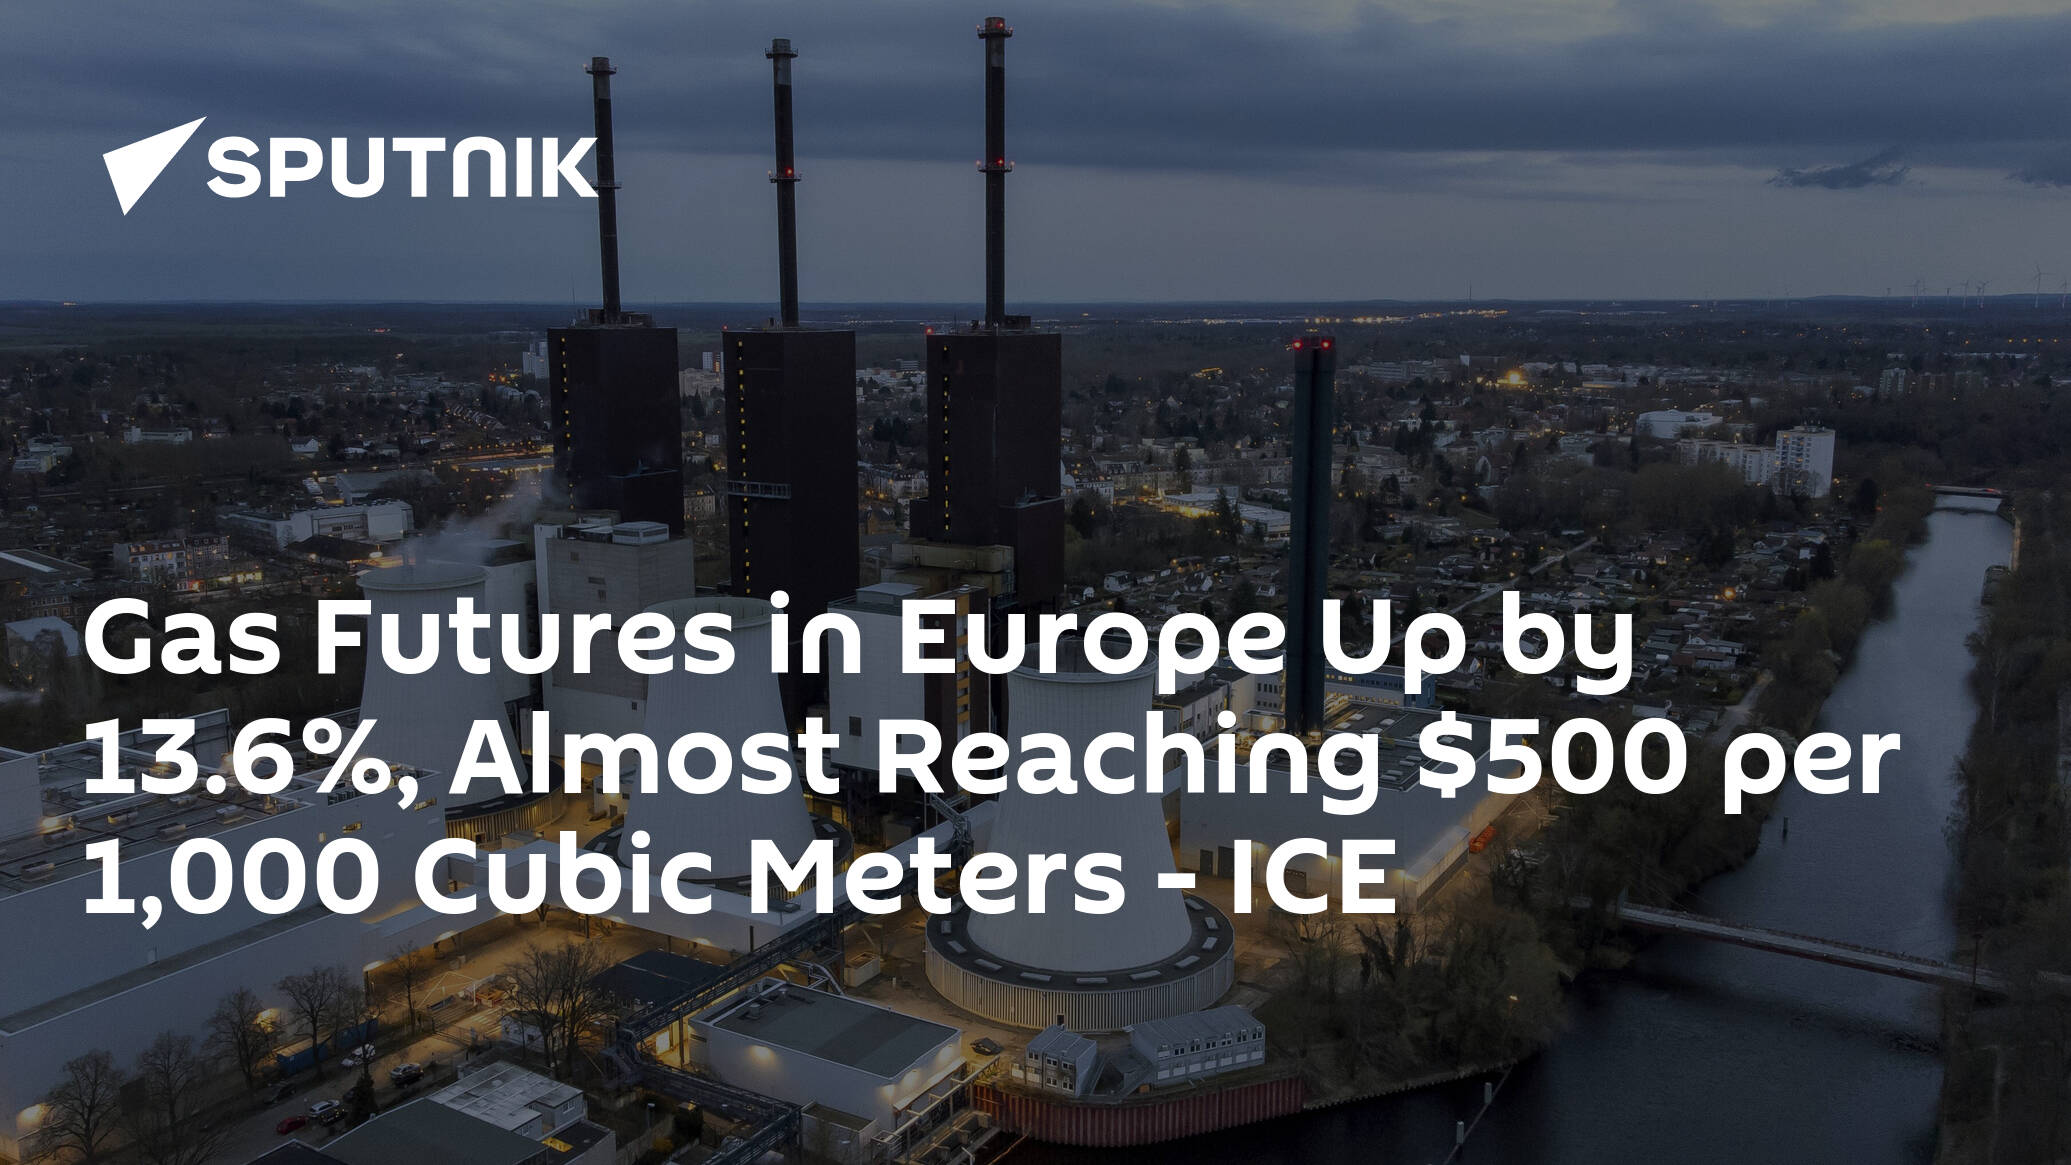 Gas Futures in Europe Up by 13.6%, Almost Reaching 0 per 1,000 Cubic Meters – ICE